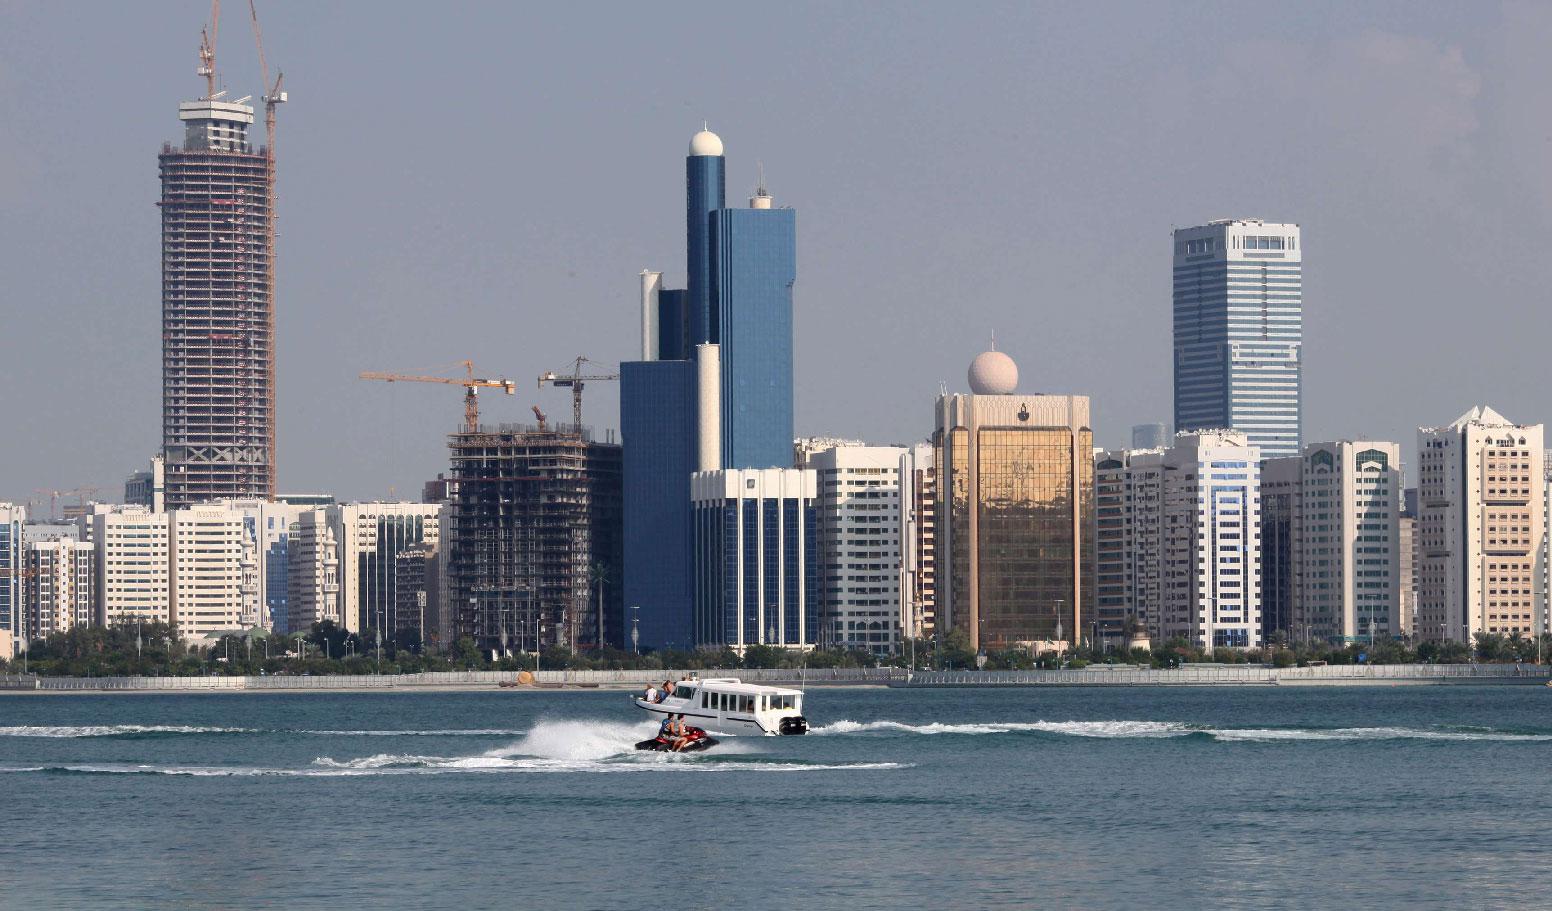 A general view of the Abu Dhabi skyline is seen, December 15, 2009.